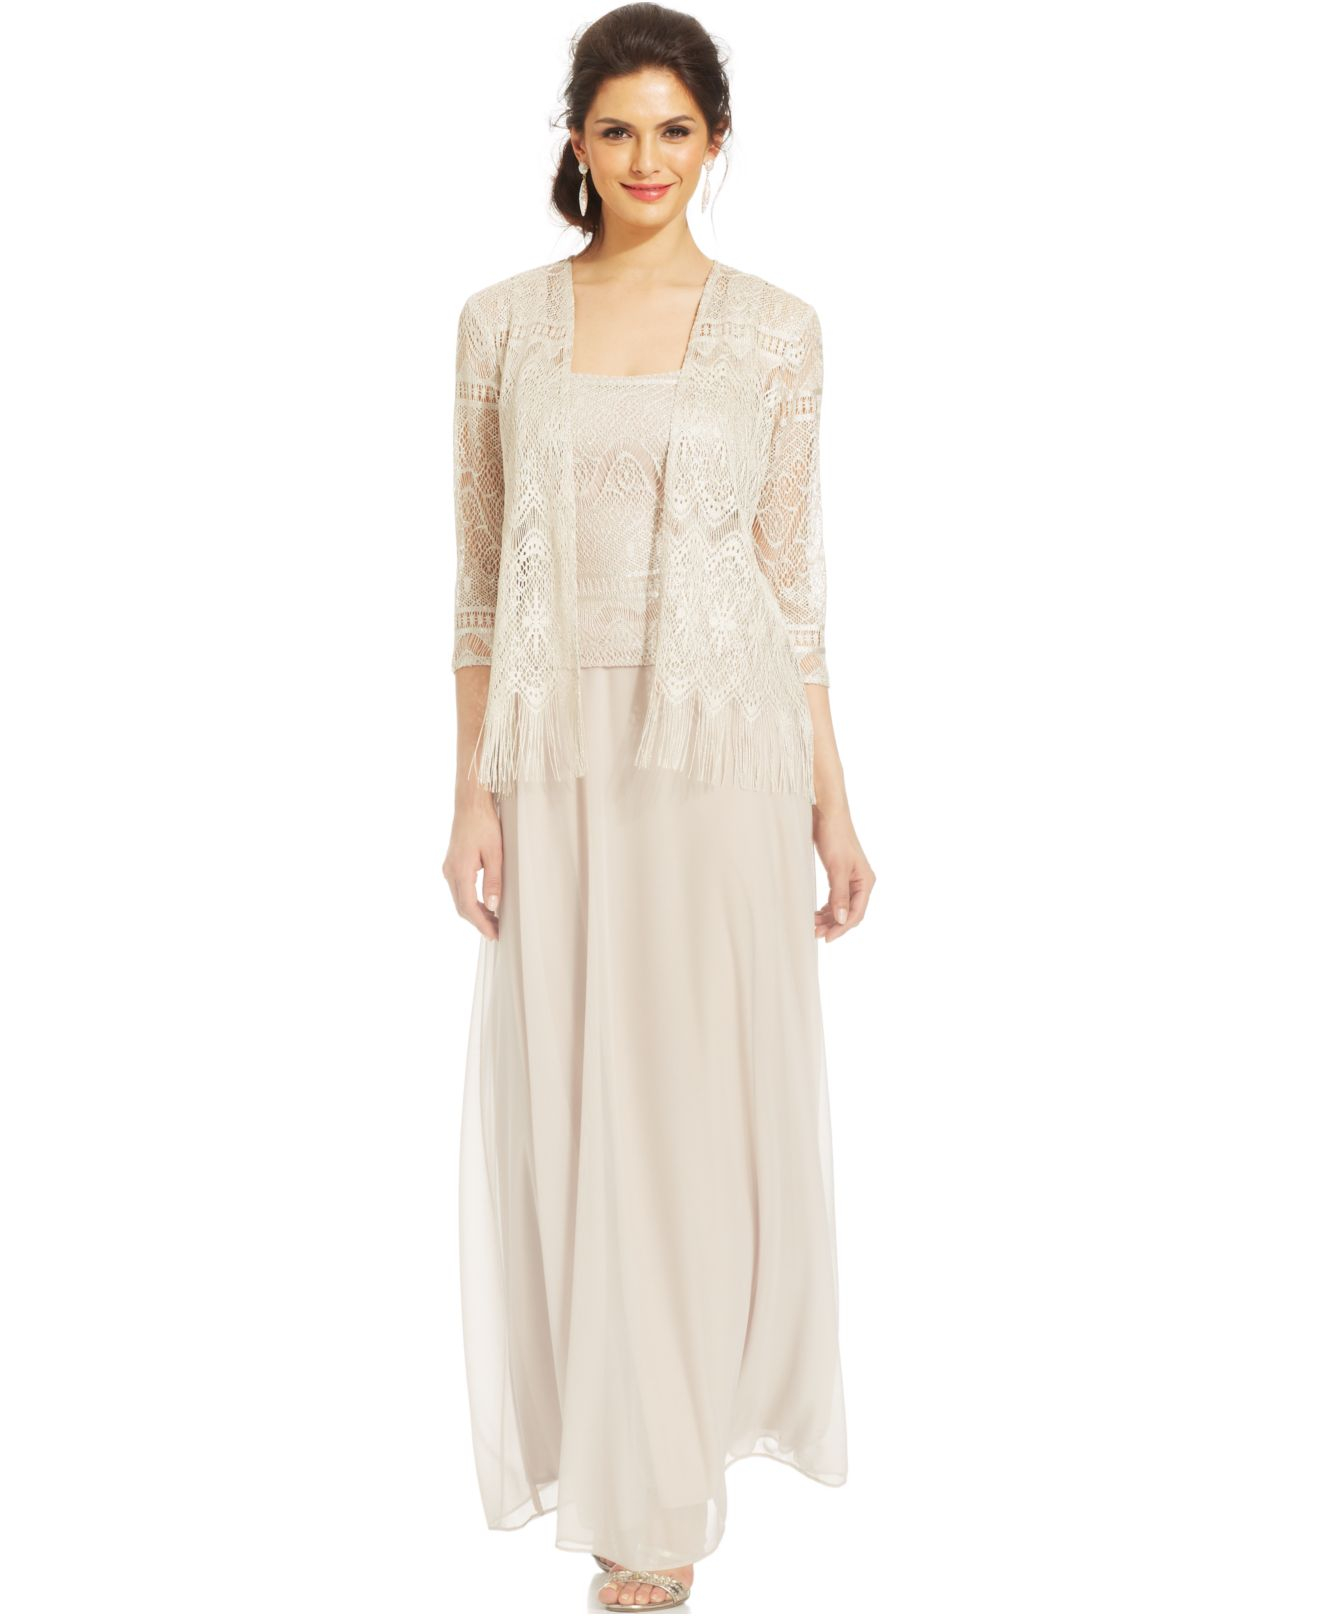 Patra Crocheted Sleeveless Gown And Jacket in Natural | Lyst